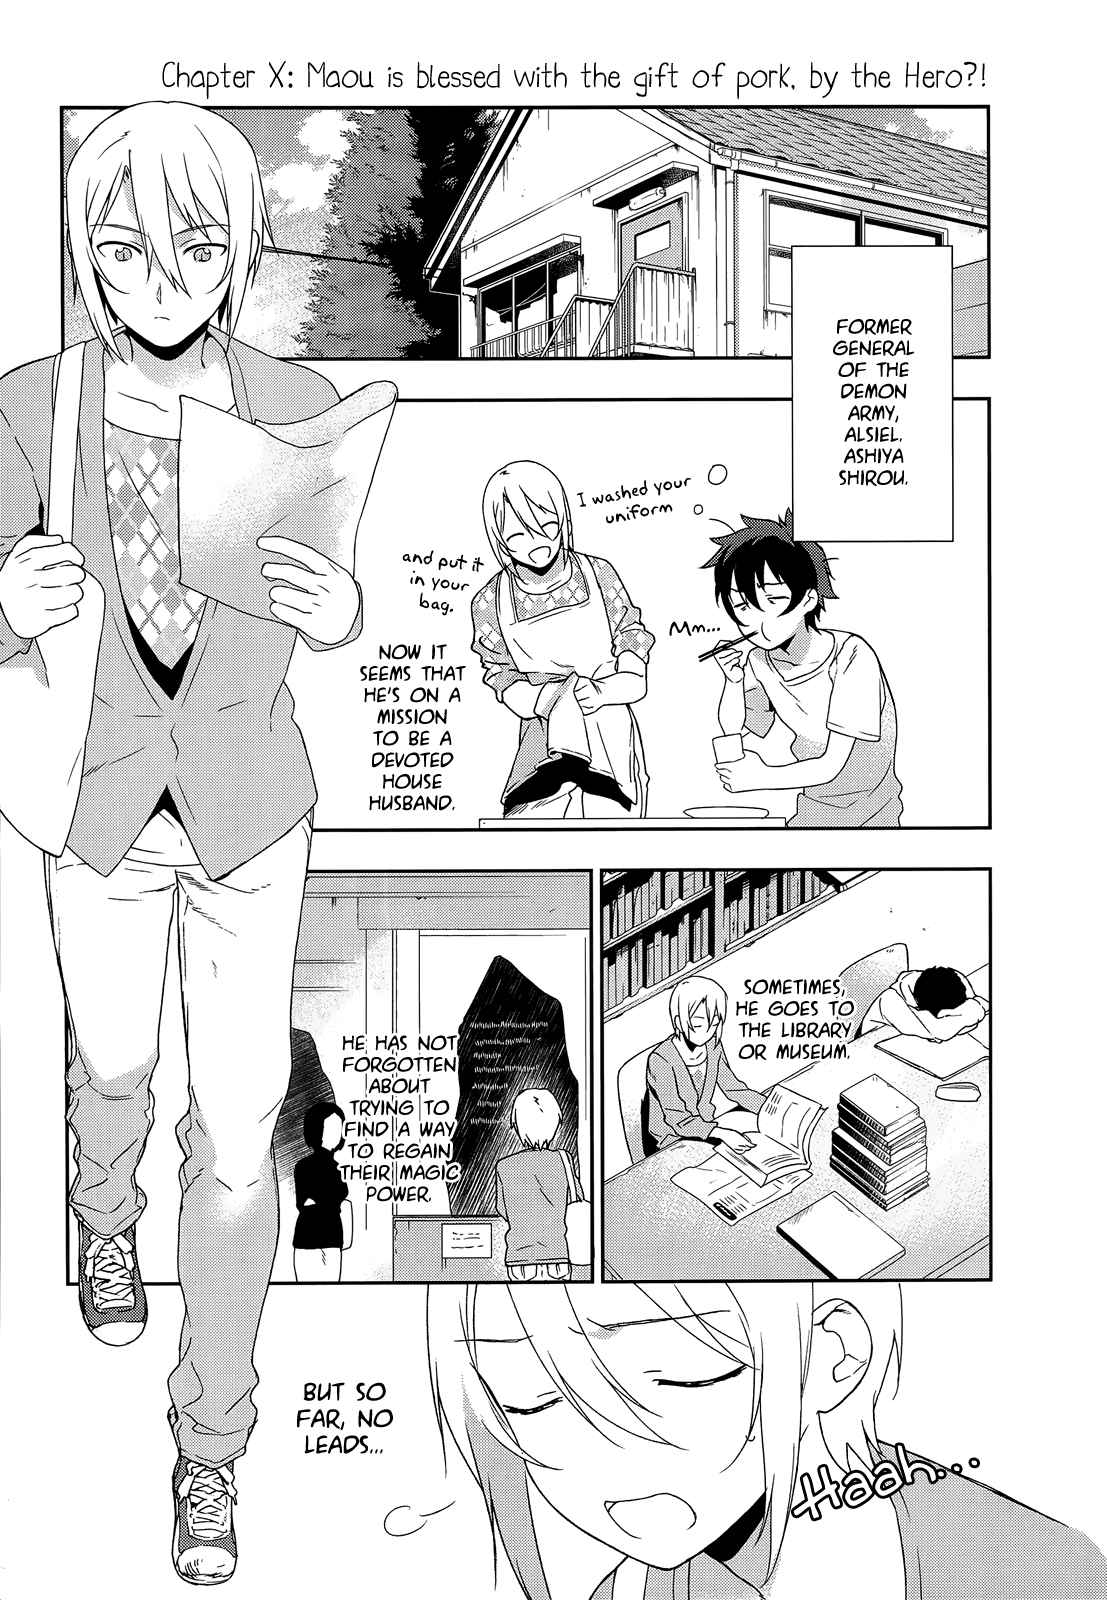 Hataraku Maousama! Vol. 1 Ch. 5.1 Maou is blessed with the gift of pork, by the Hero?! (Omake?)